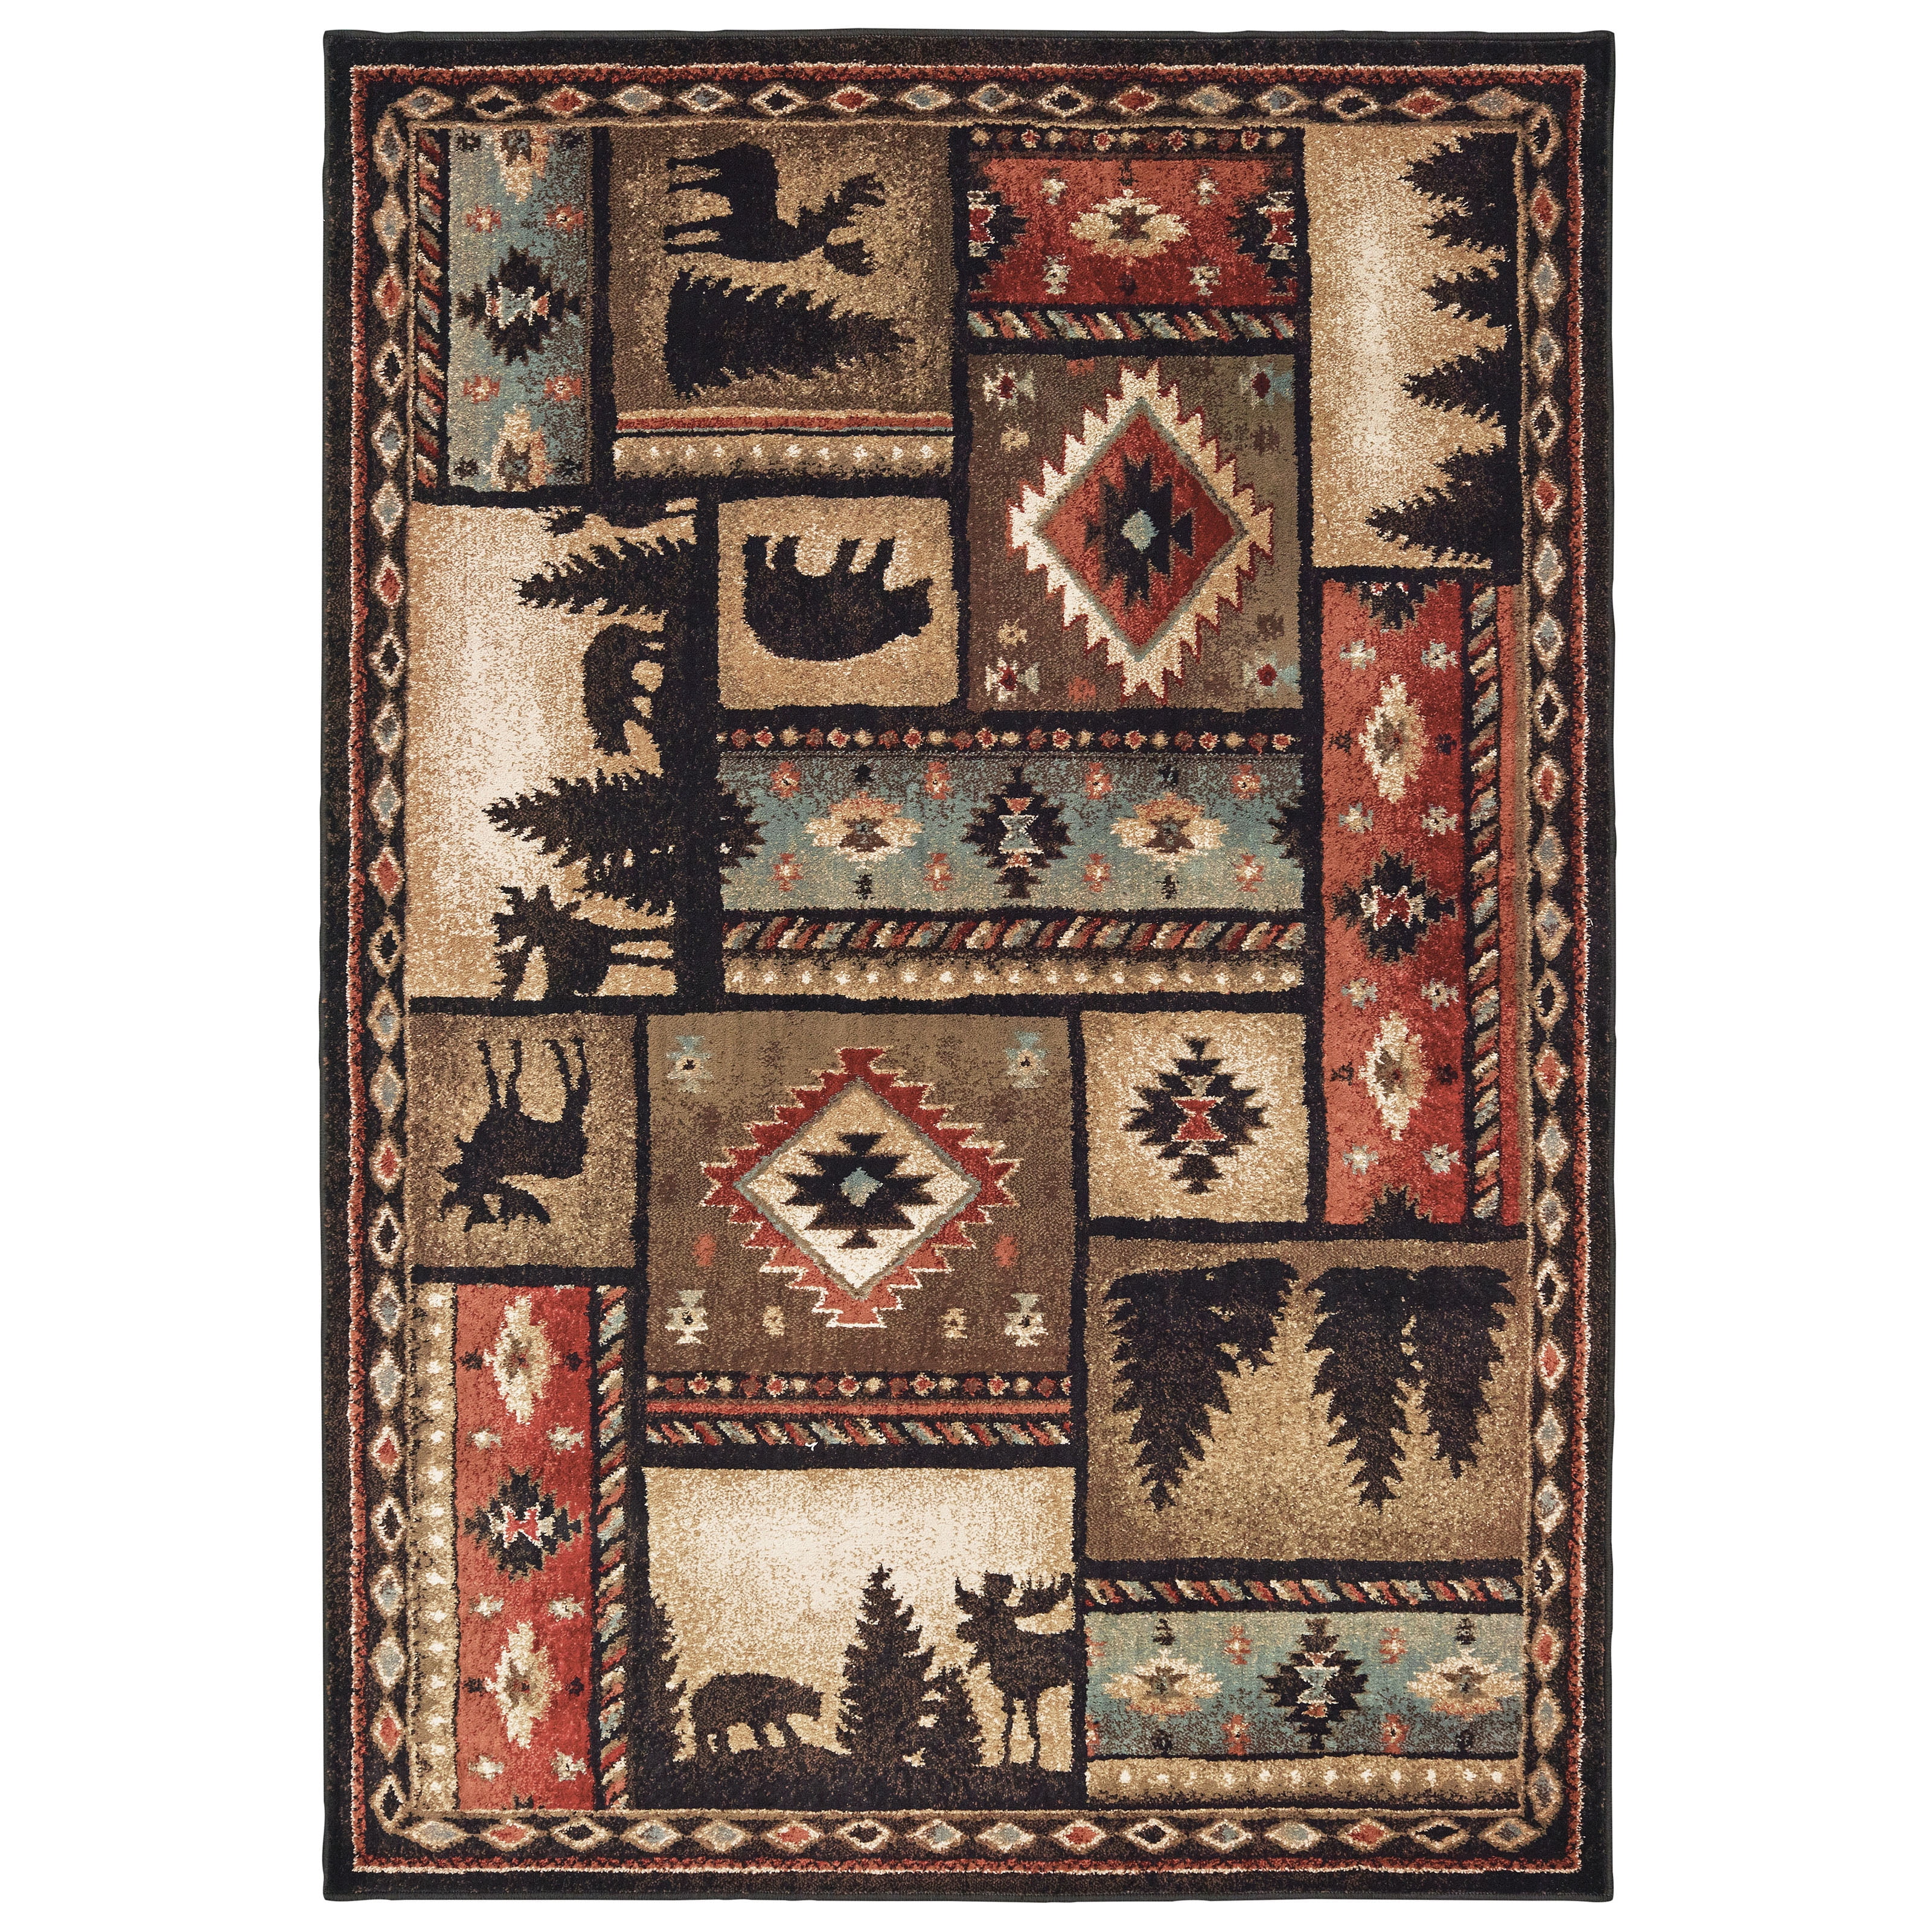 Wide Runner Bear Lodge Cabin Forest Area Rug **FREE SHIPPING** 2'7" x 7'3" 2x8 